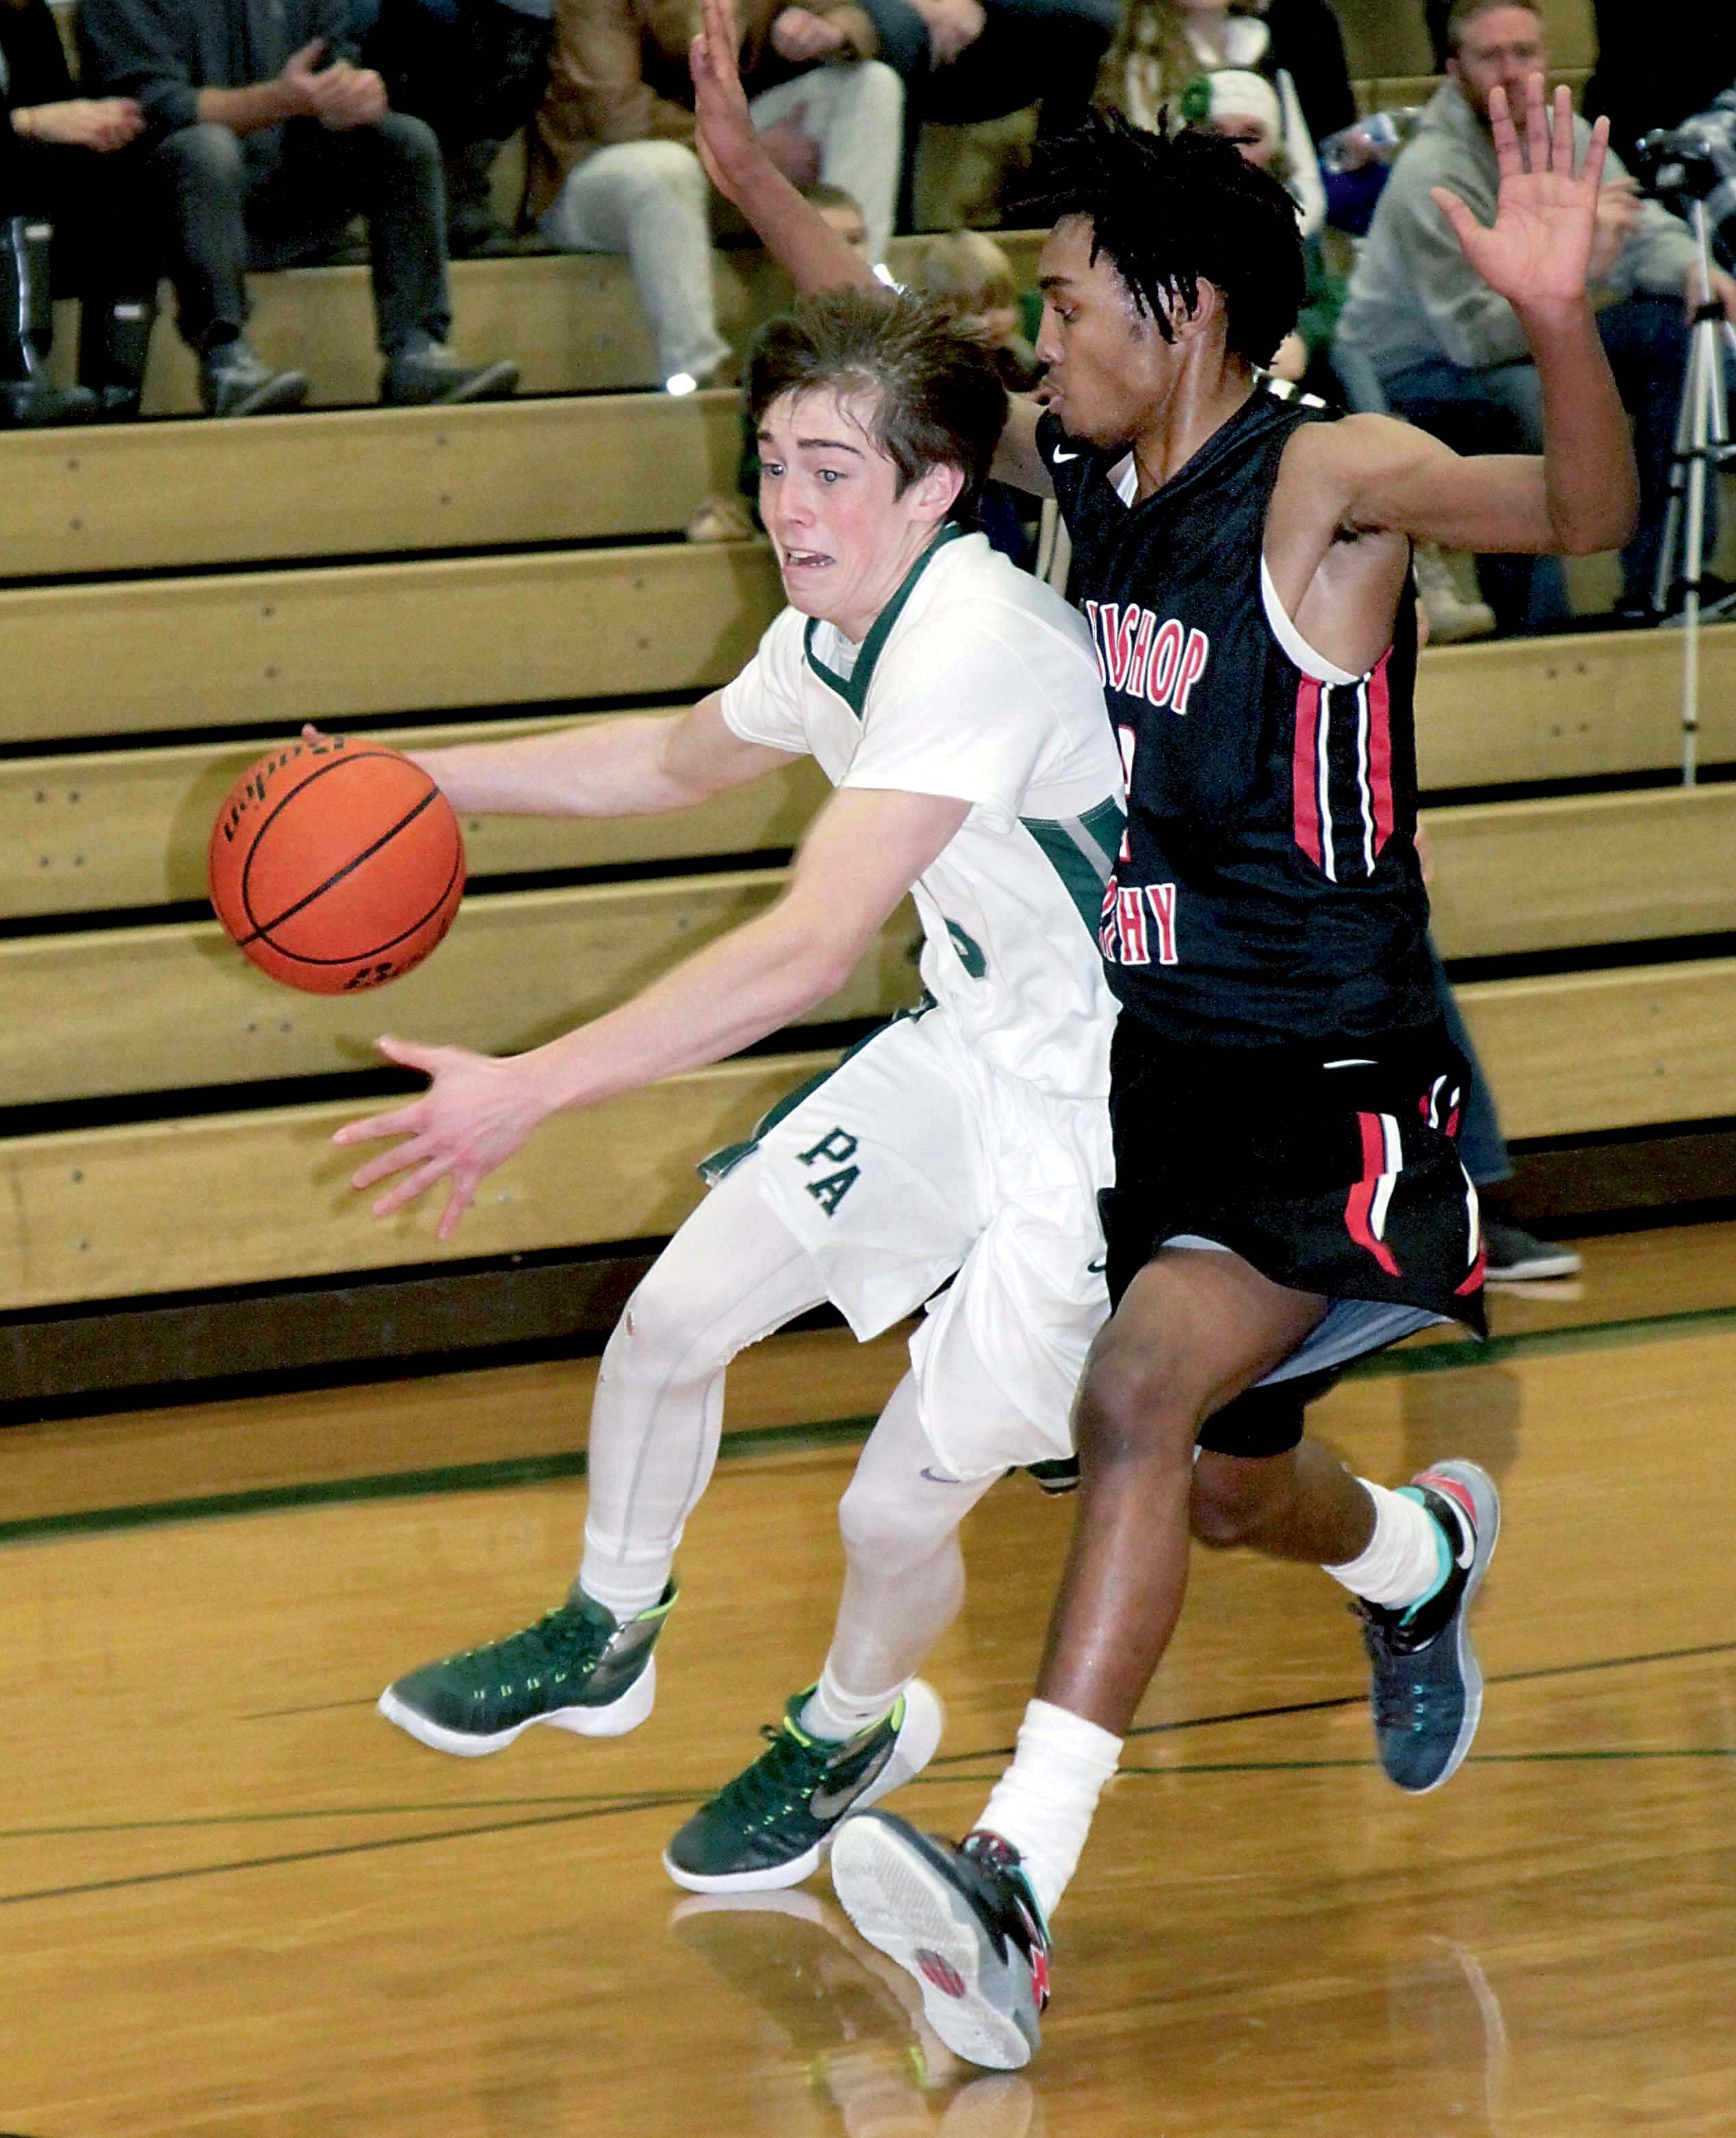 Port Angeles' Noah McGoff drives against Archbishop Murphy's Carson Truong during the first half of the Roughriders' 46-42 loss at Port Angeles High School. Dave Logan/for Peninsula Daily News